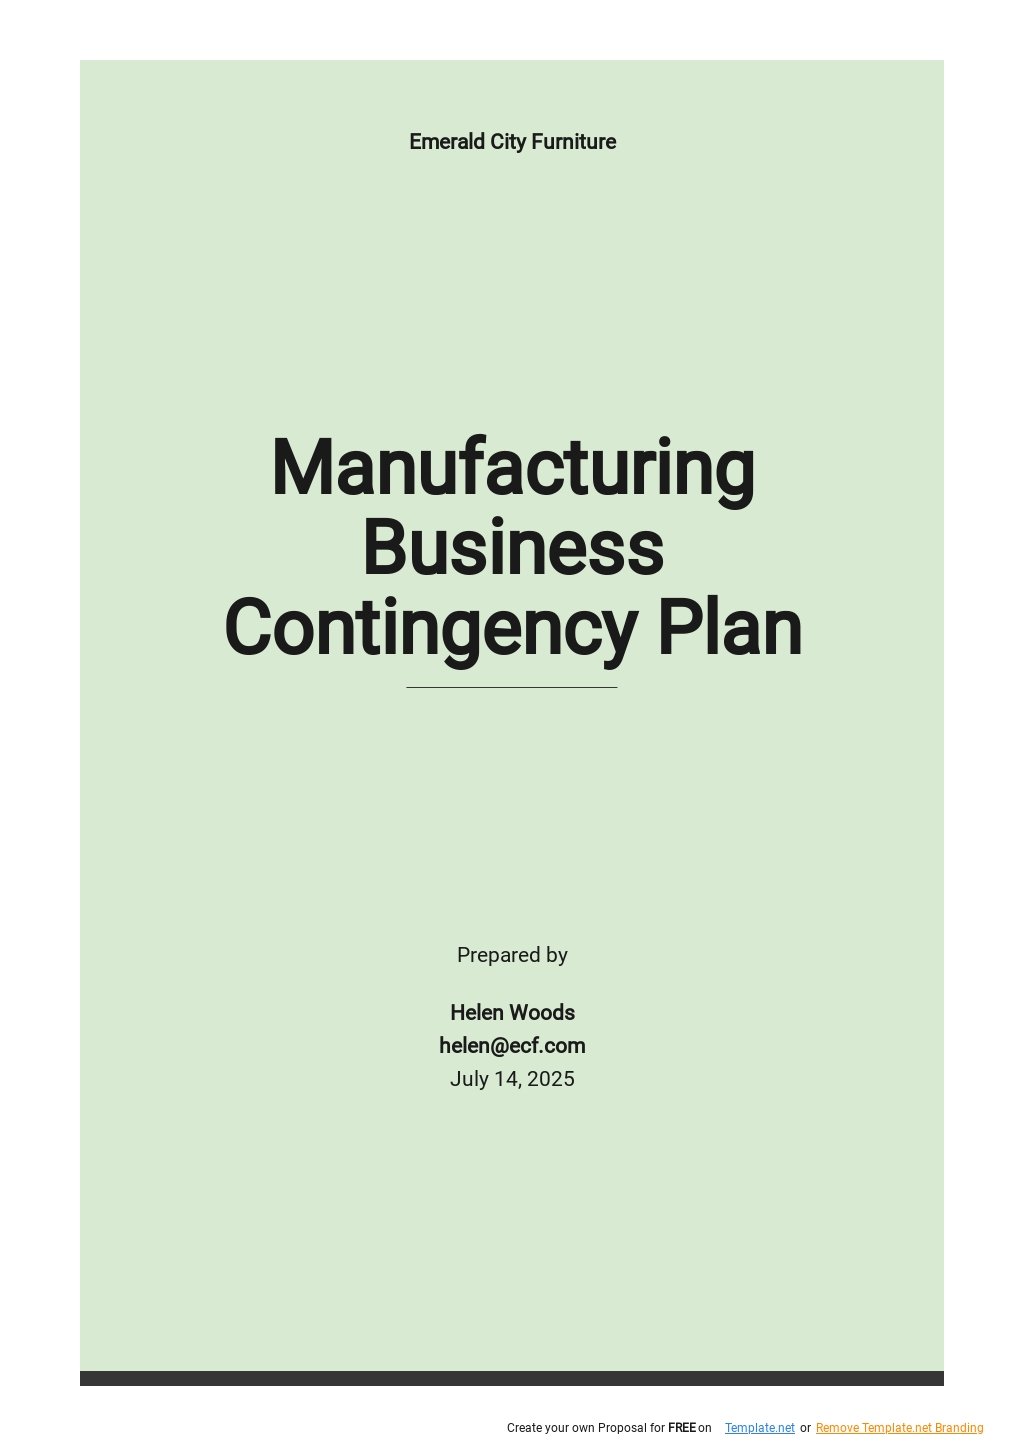 Manufacturing Business Contingency Plan Template.jpe